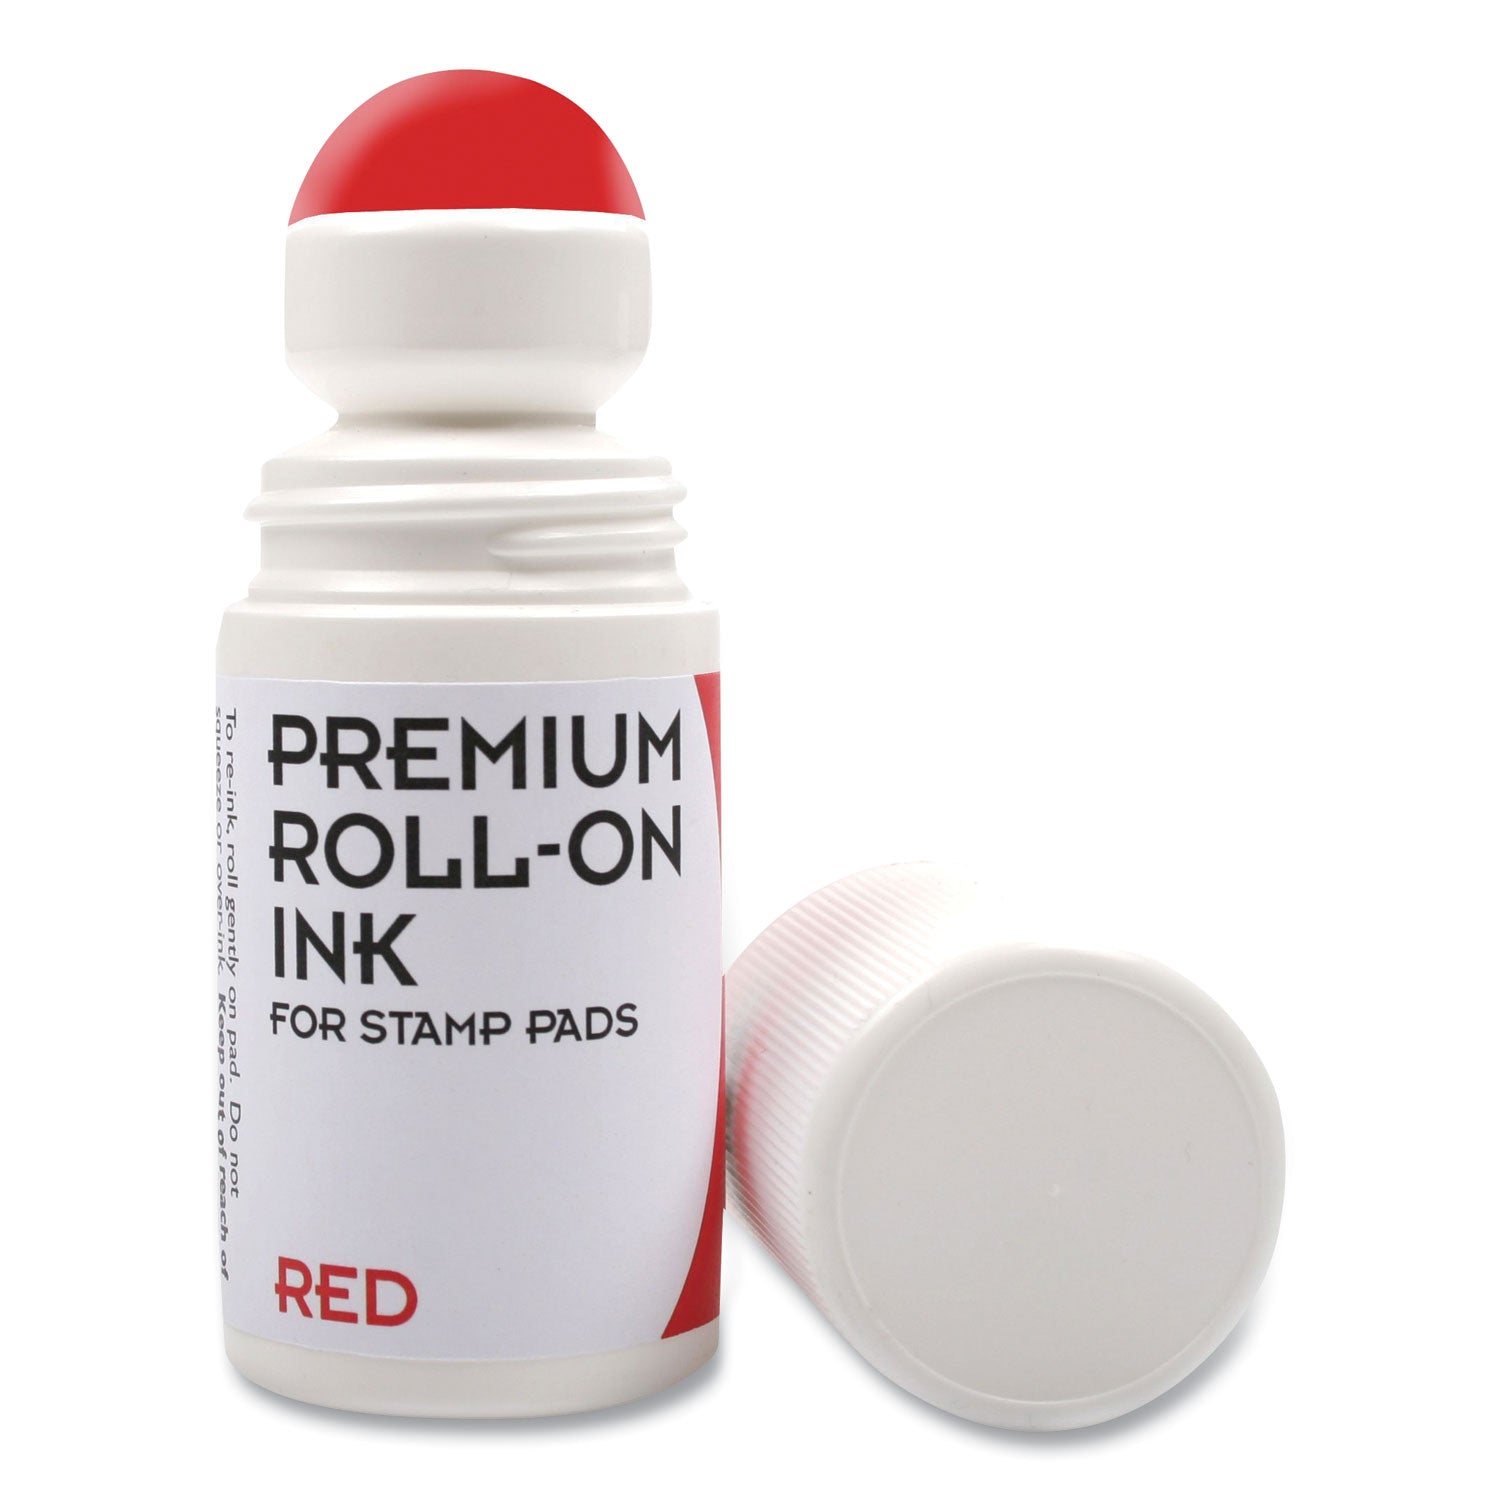 premium-roll-on-ink-2-oz-red_csc030260 - 1